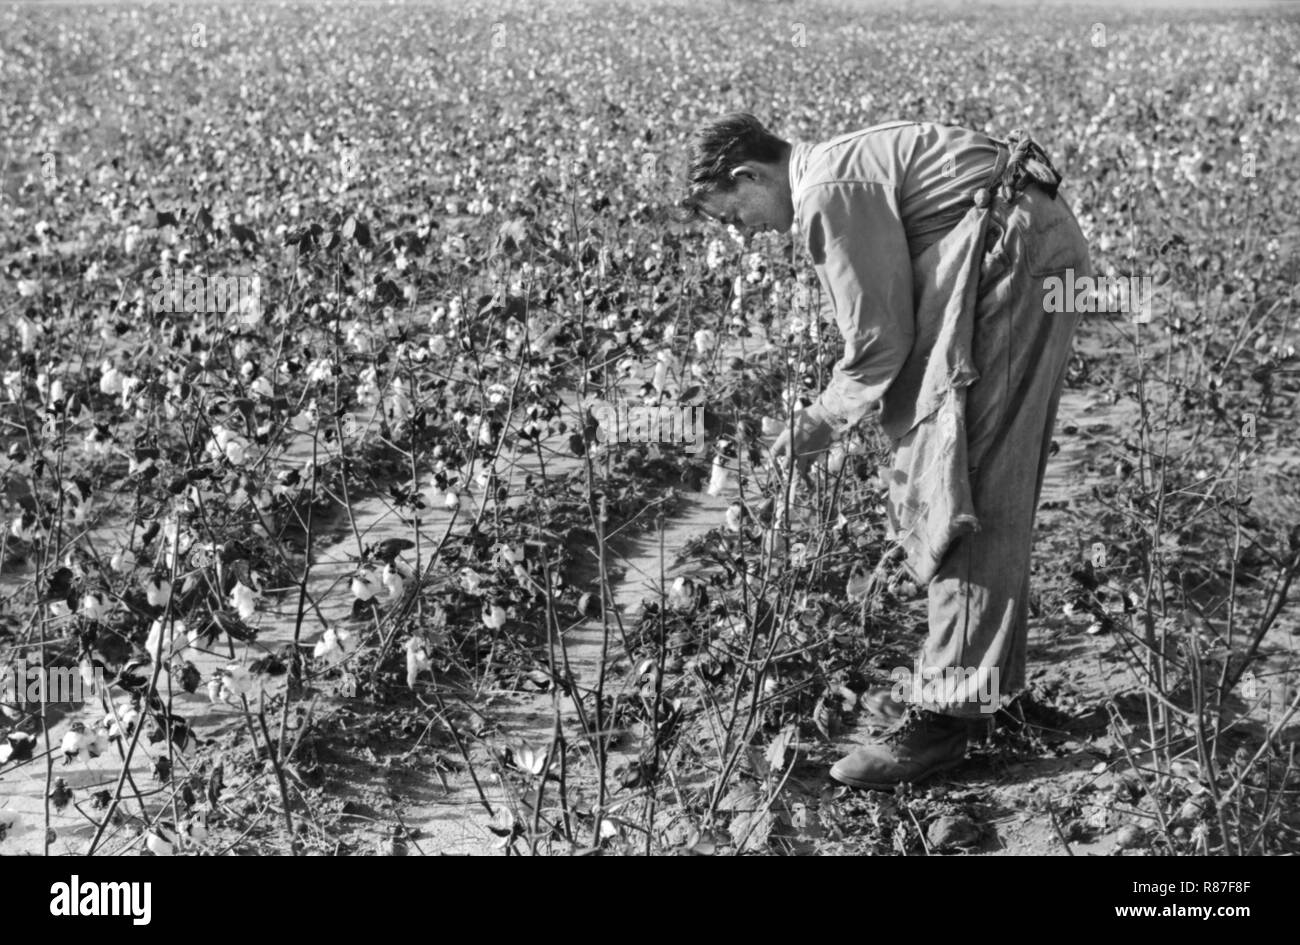 Oldest Son of J.A. Johnson Picking Cotton, Statesville, North Carolina, USA, Marion Post Wolcott, Farm Security Administration, October 1939 Stock Photo